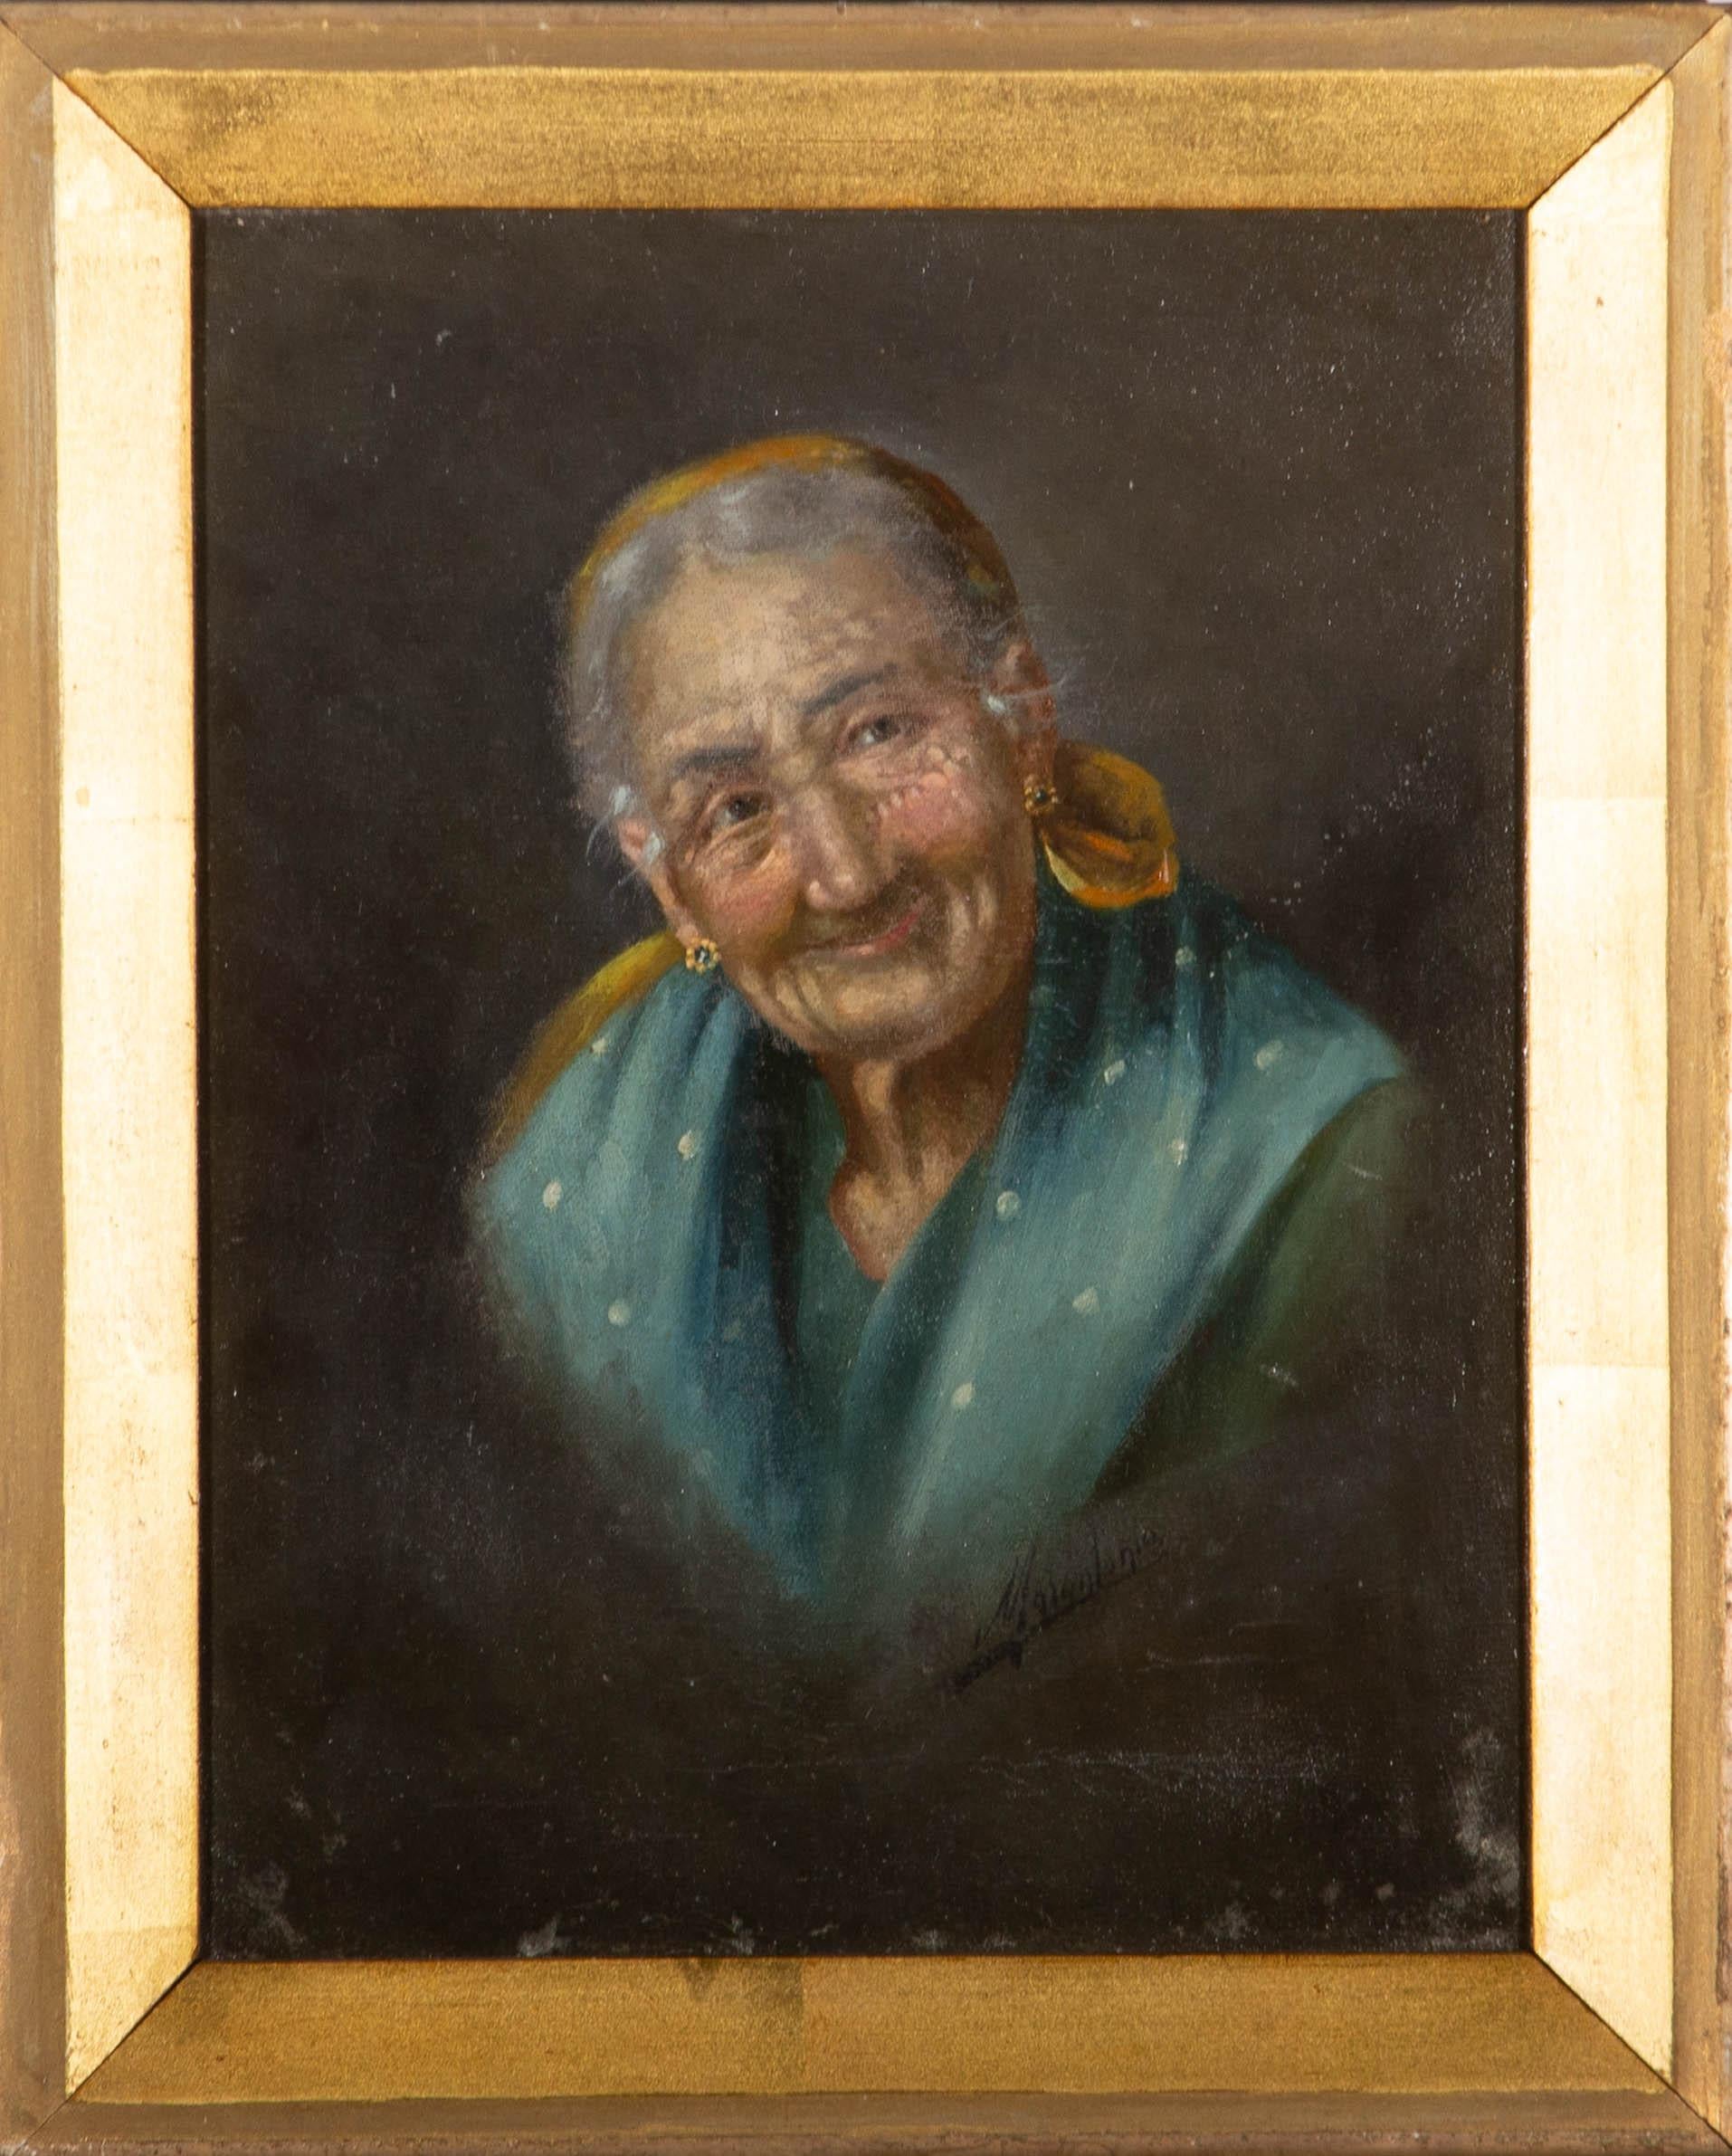 A portrait of a kind Italian nonna wearing a yellow headband and blue shawl. Presented in a distressed gilt-effect slip. Signed to the lower-right corner. On canvas laid to board.
